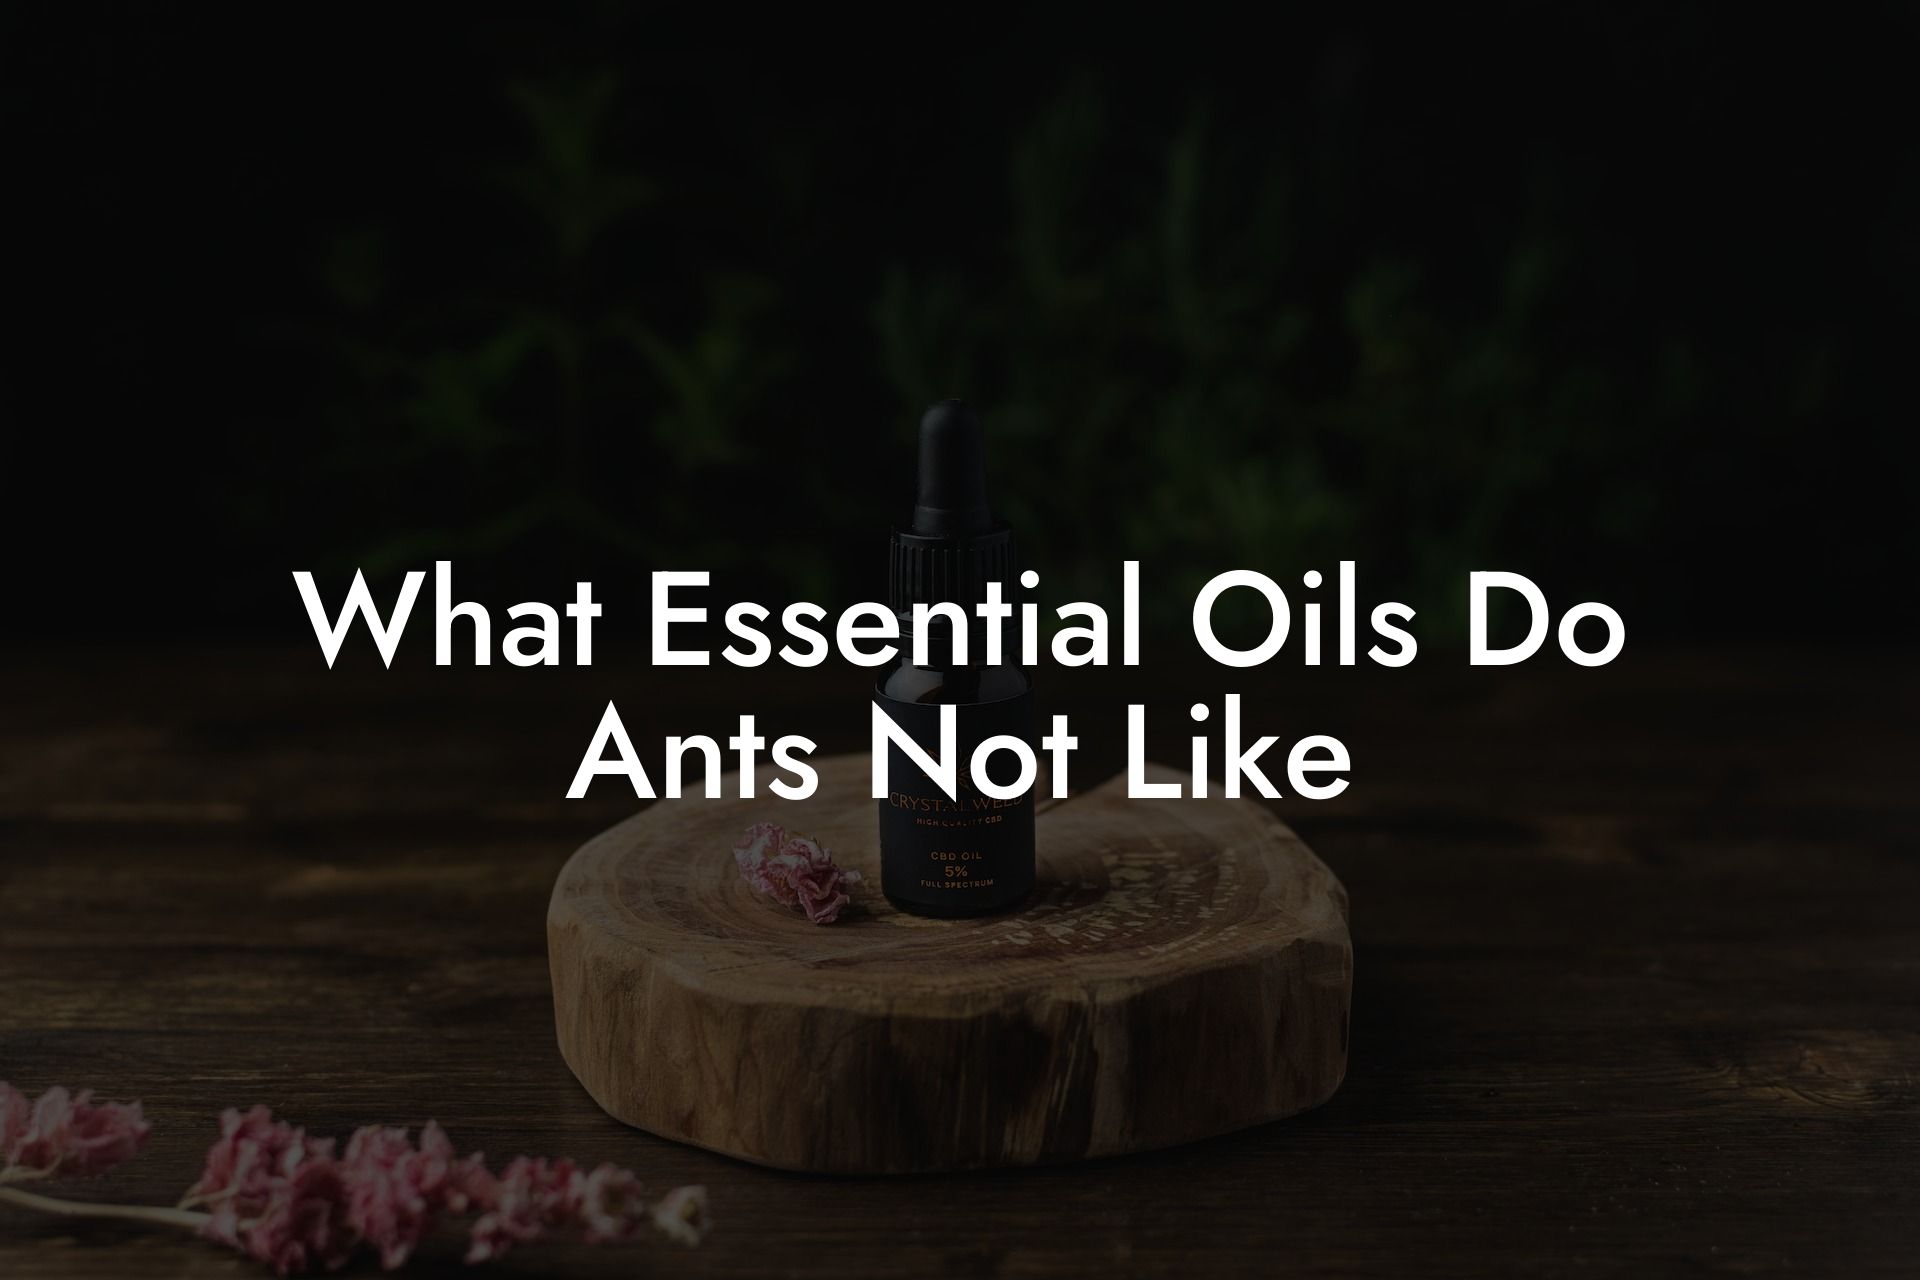 What Essential Oils Do Ants Not Like